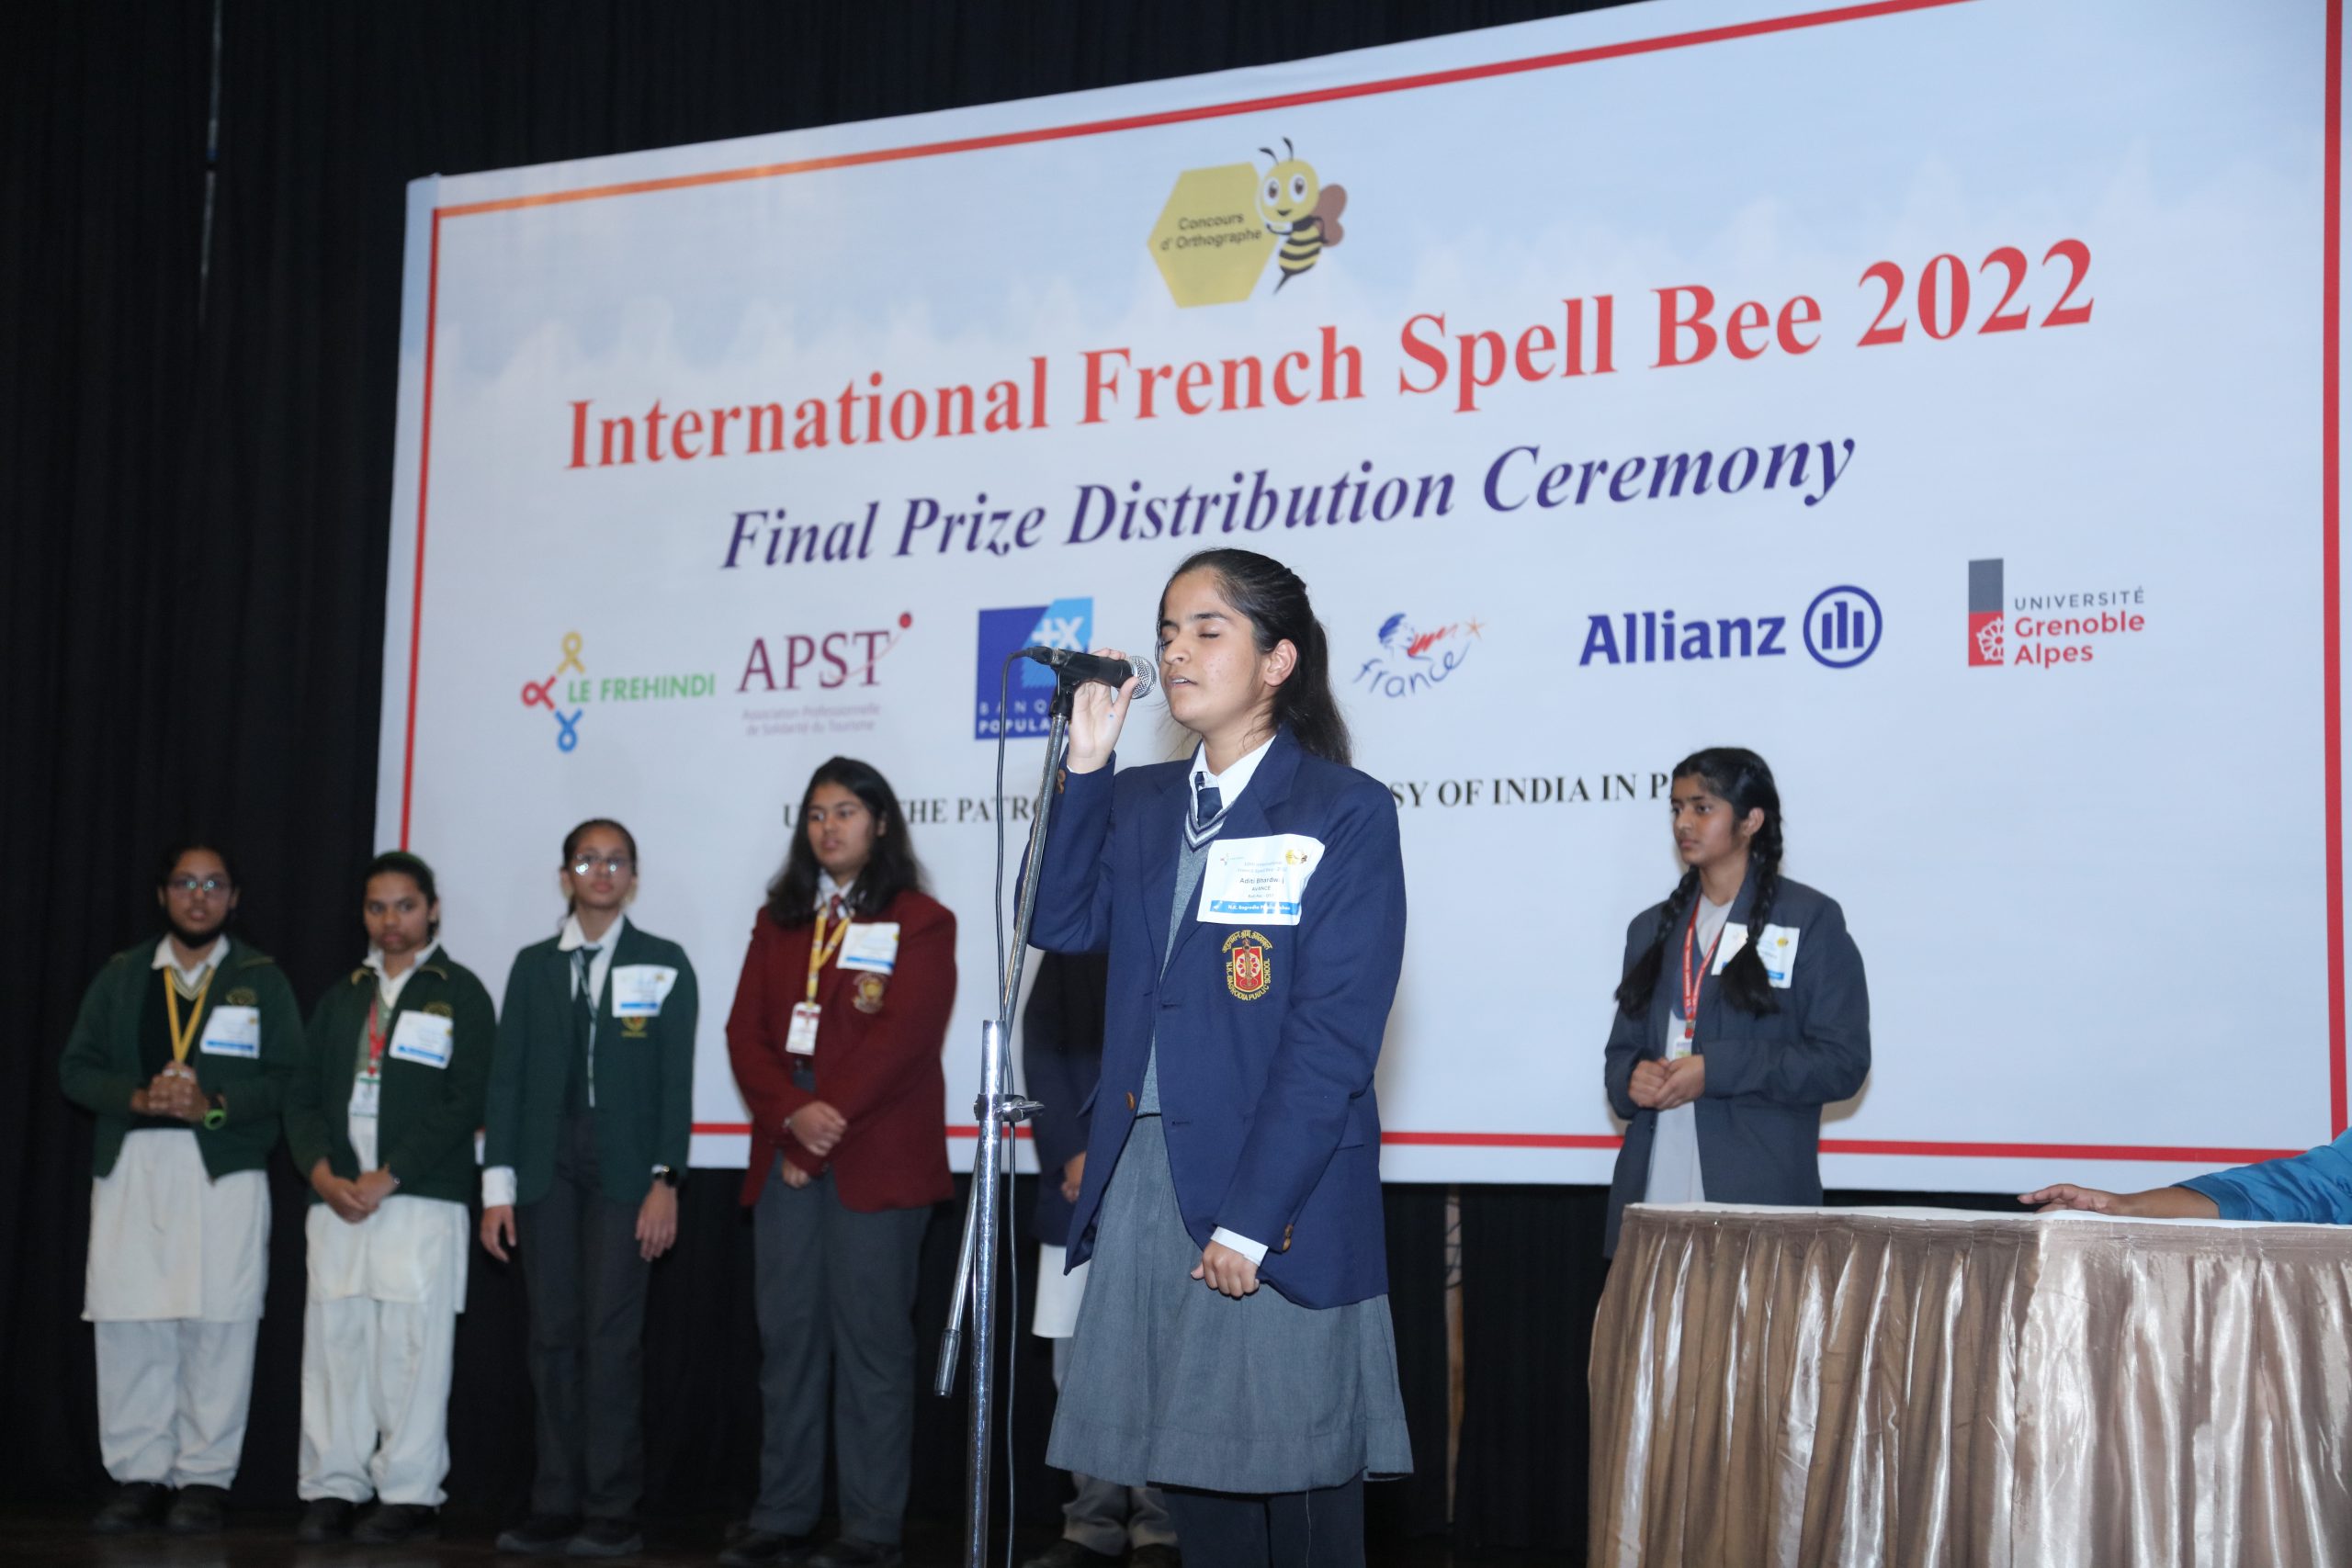 “Unleashing Potential: Personal Growth and Confidence Building through the International French Spell Bee”